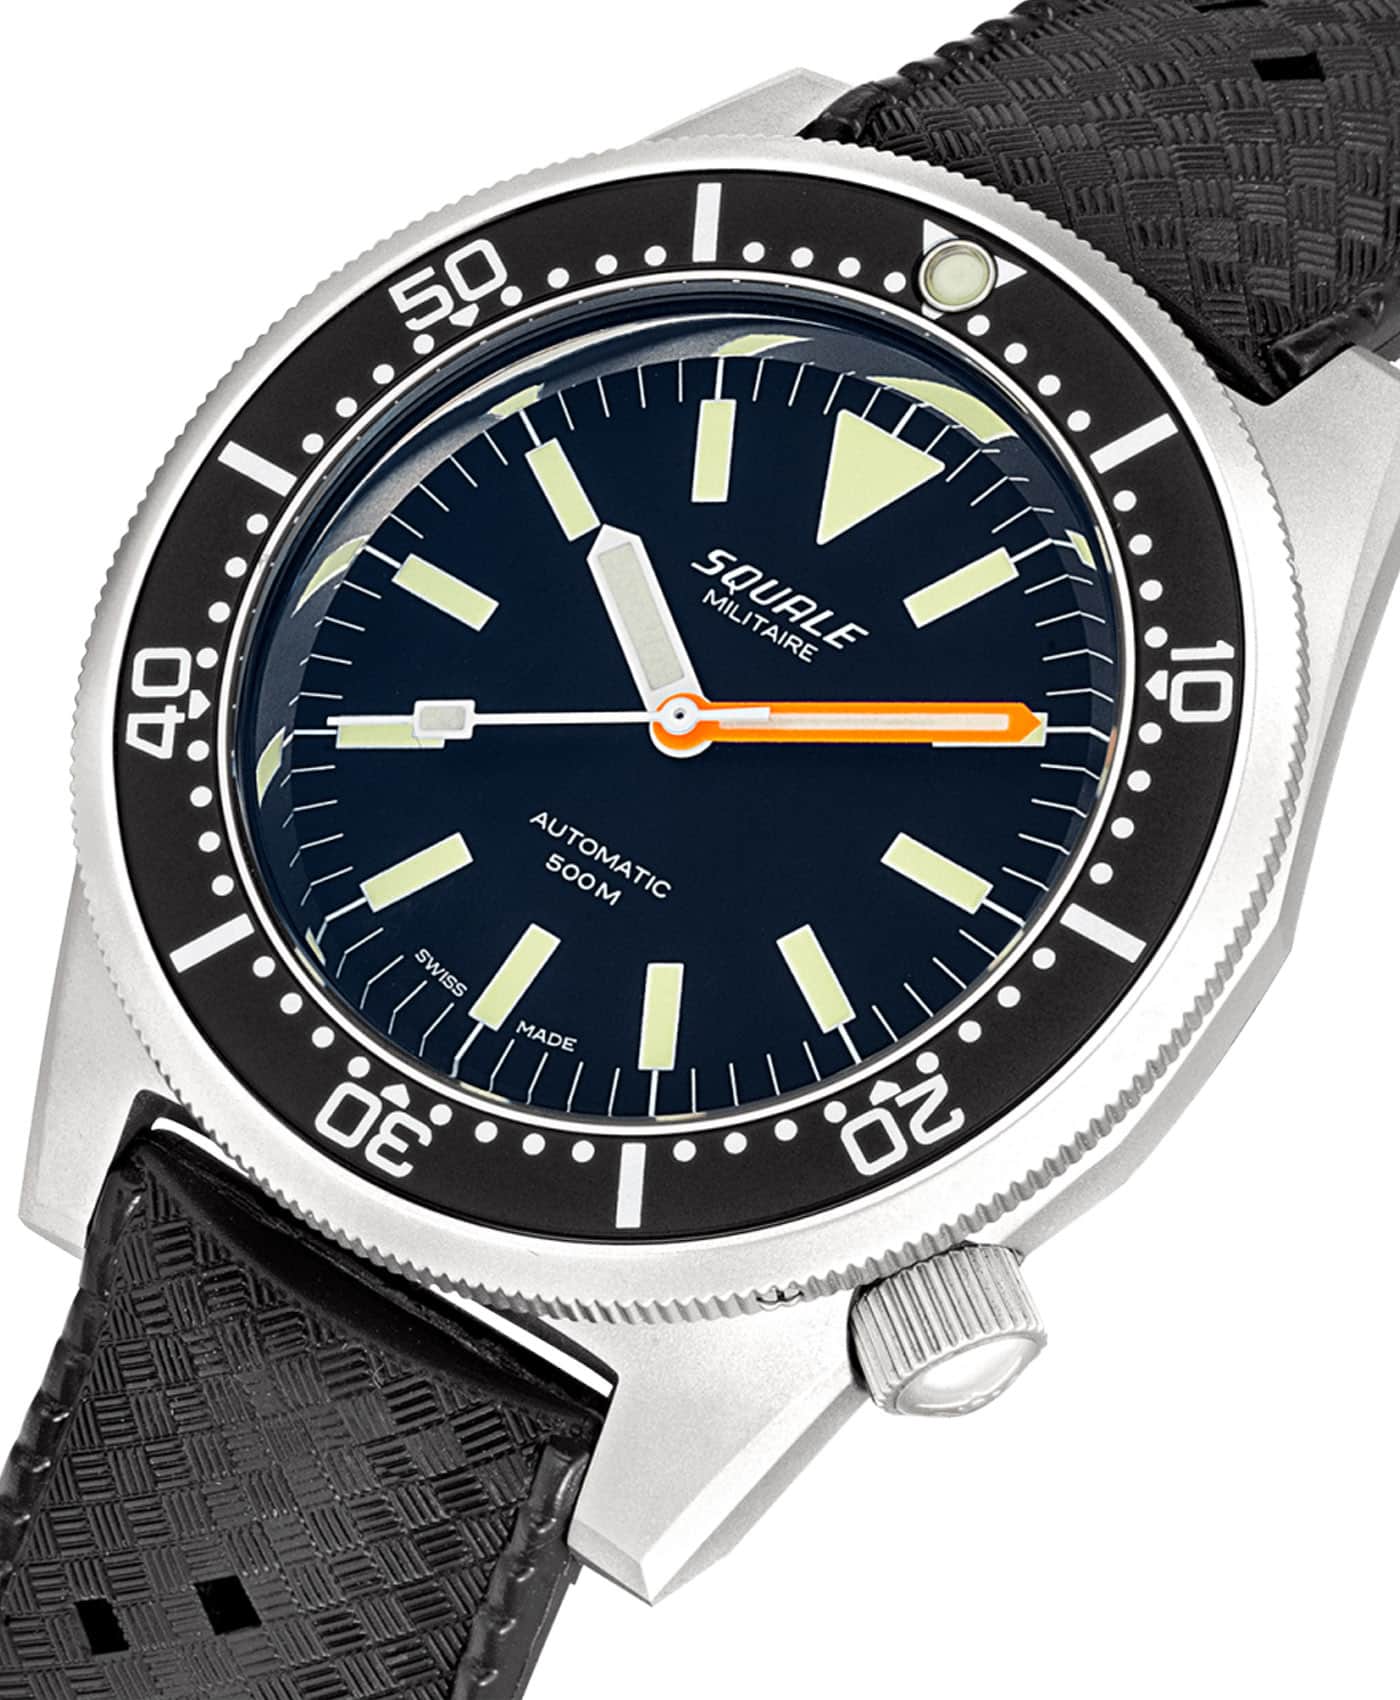 Squale 1521-026-A Militaire Blasted_close up